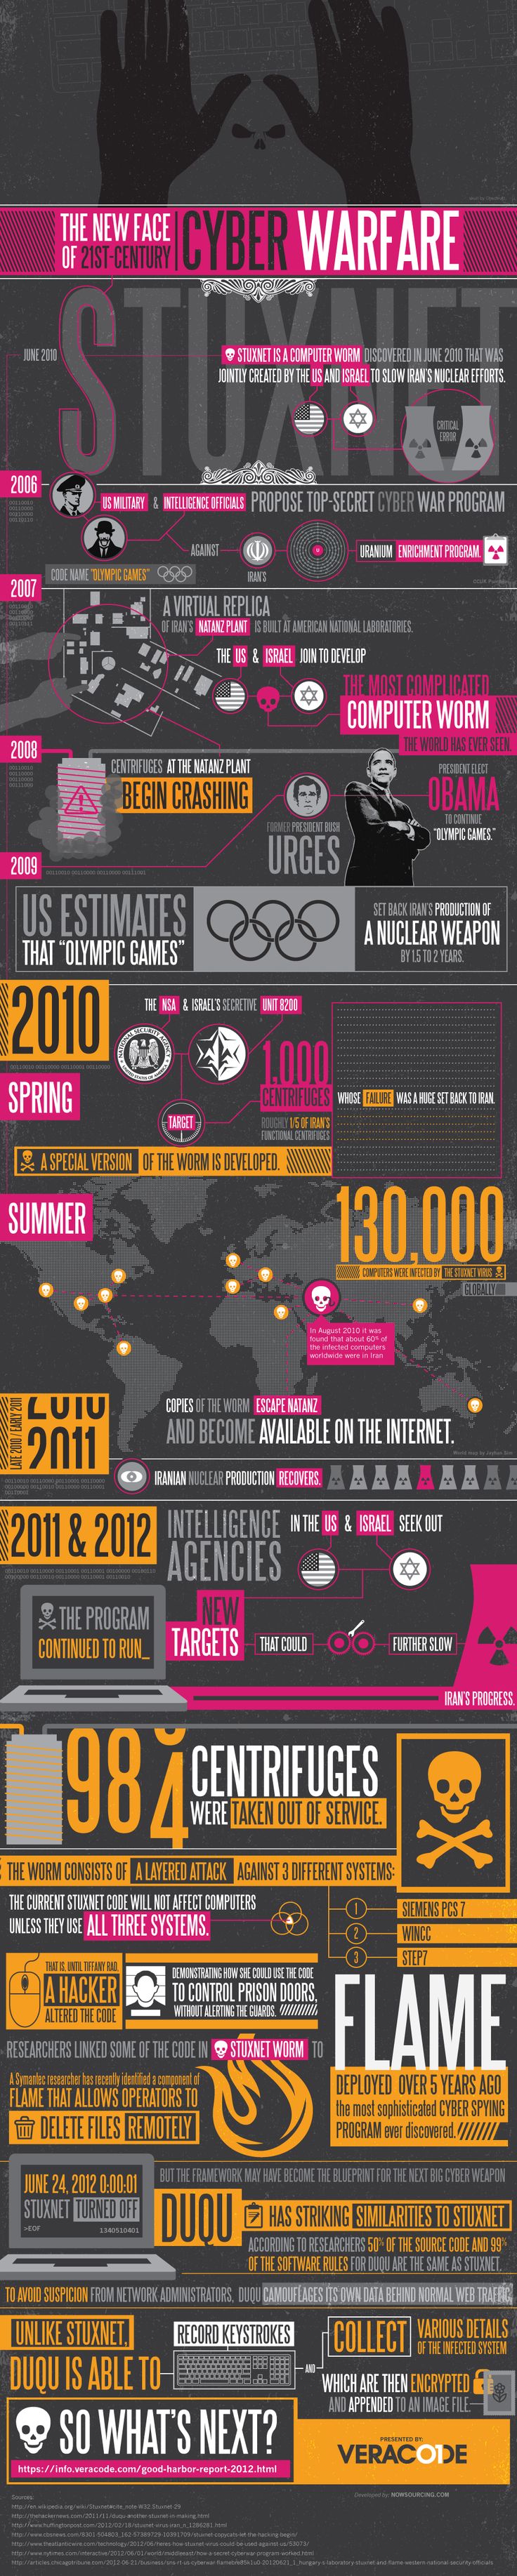 Stuxnet: The New Face of Cyber Warfare